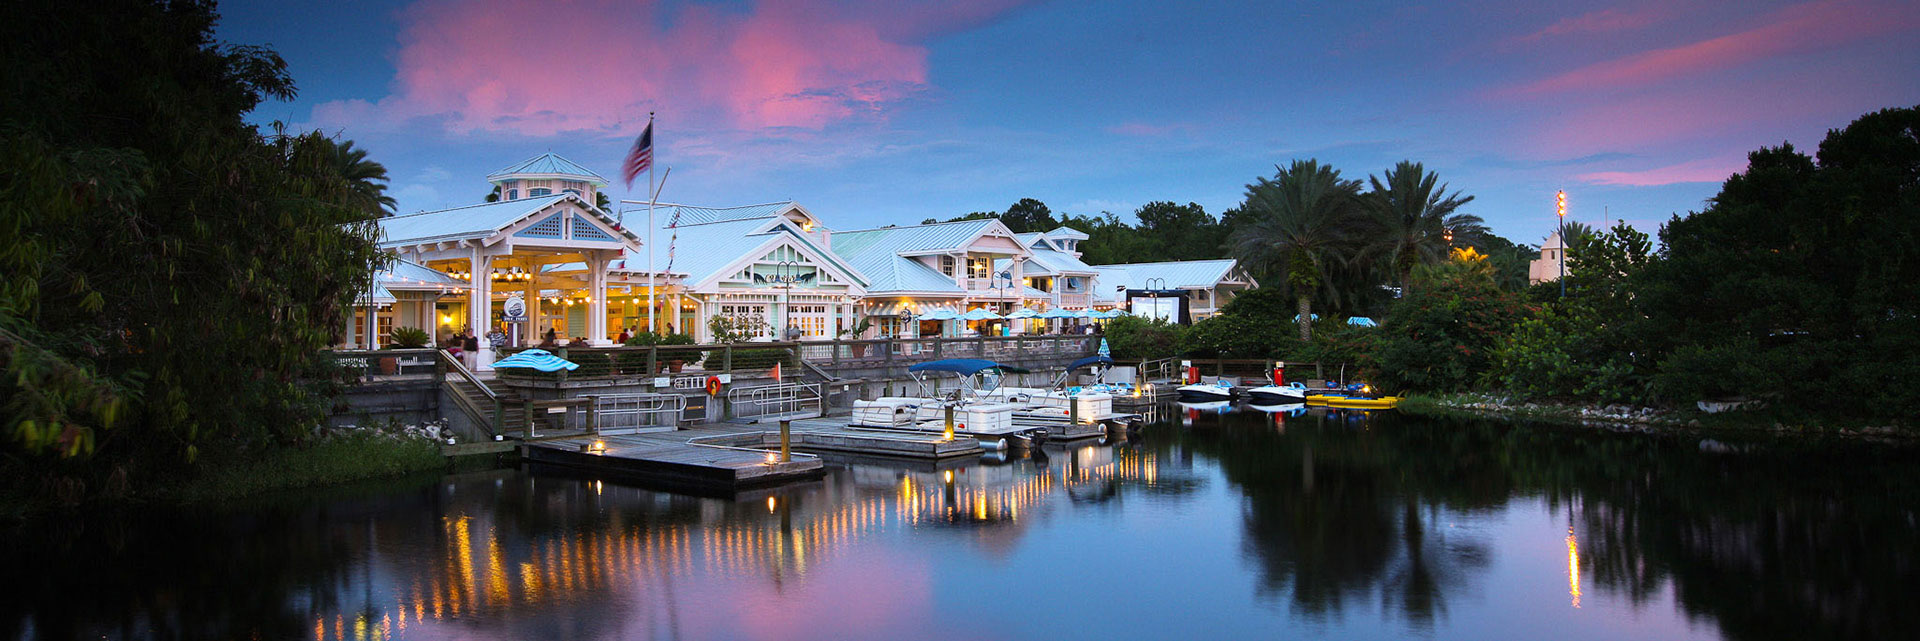 Disney Vacation Club Buying Guide Old Key West